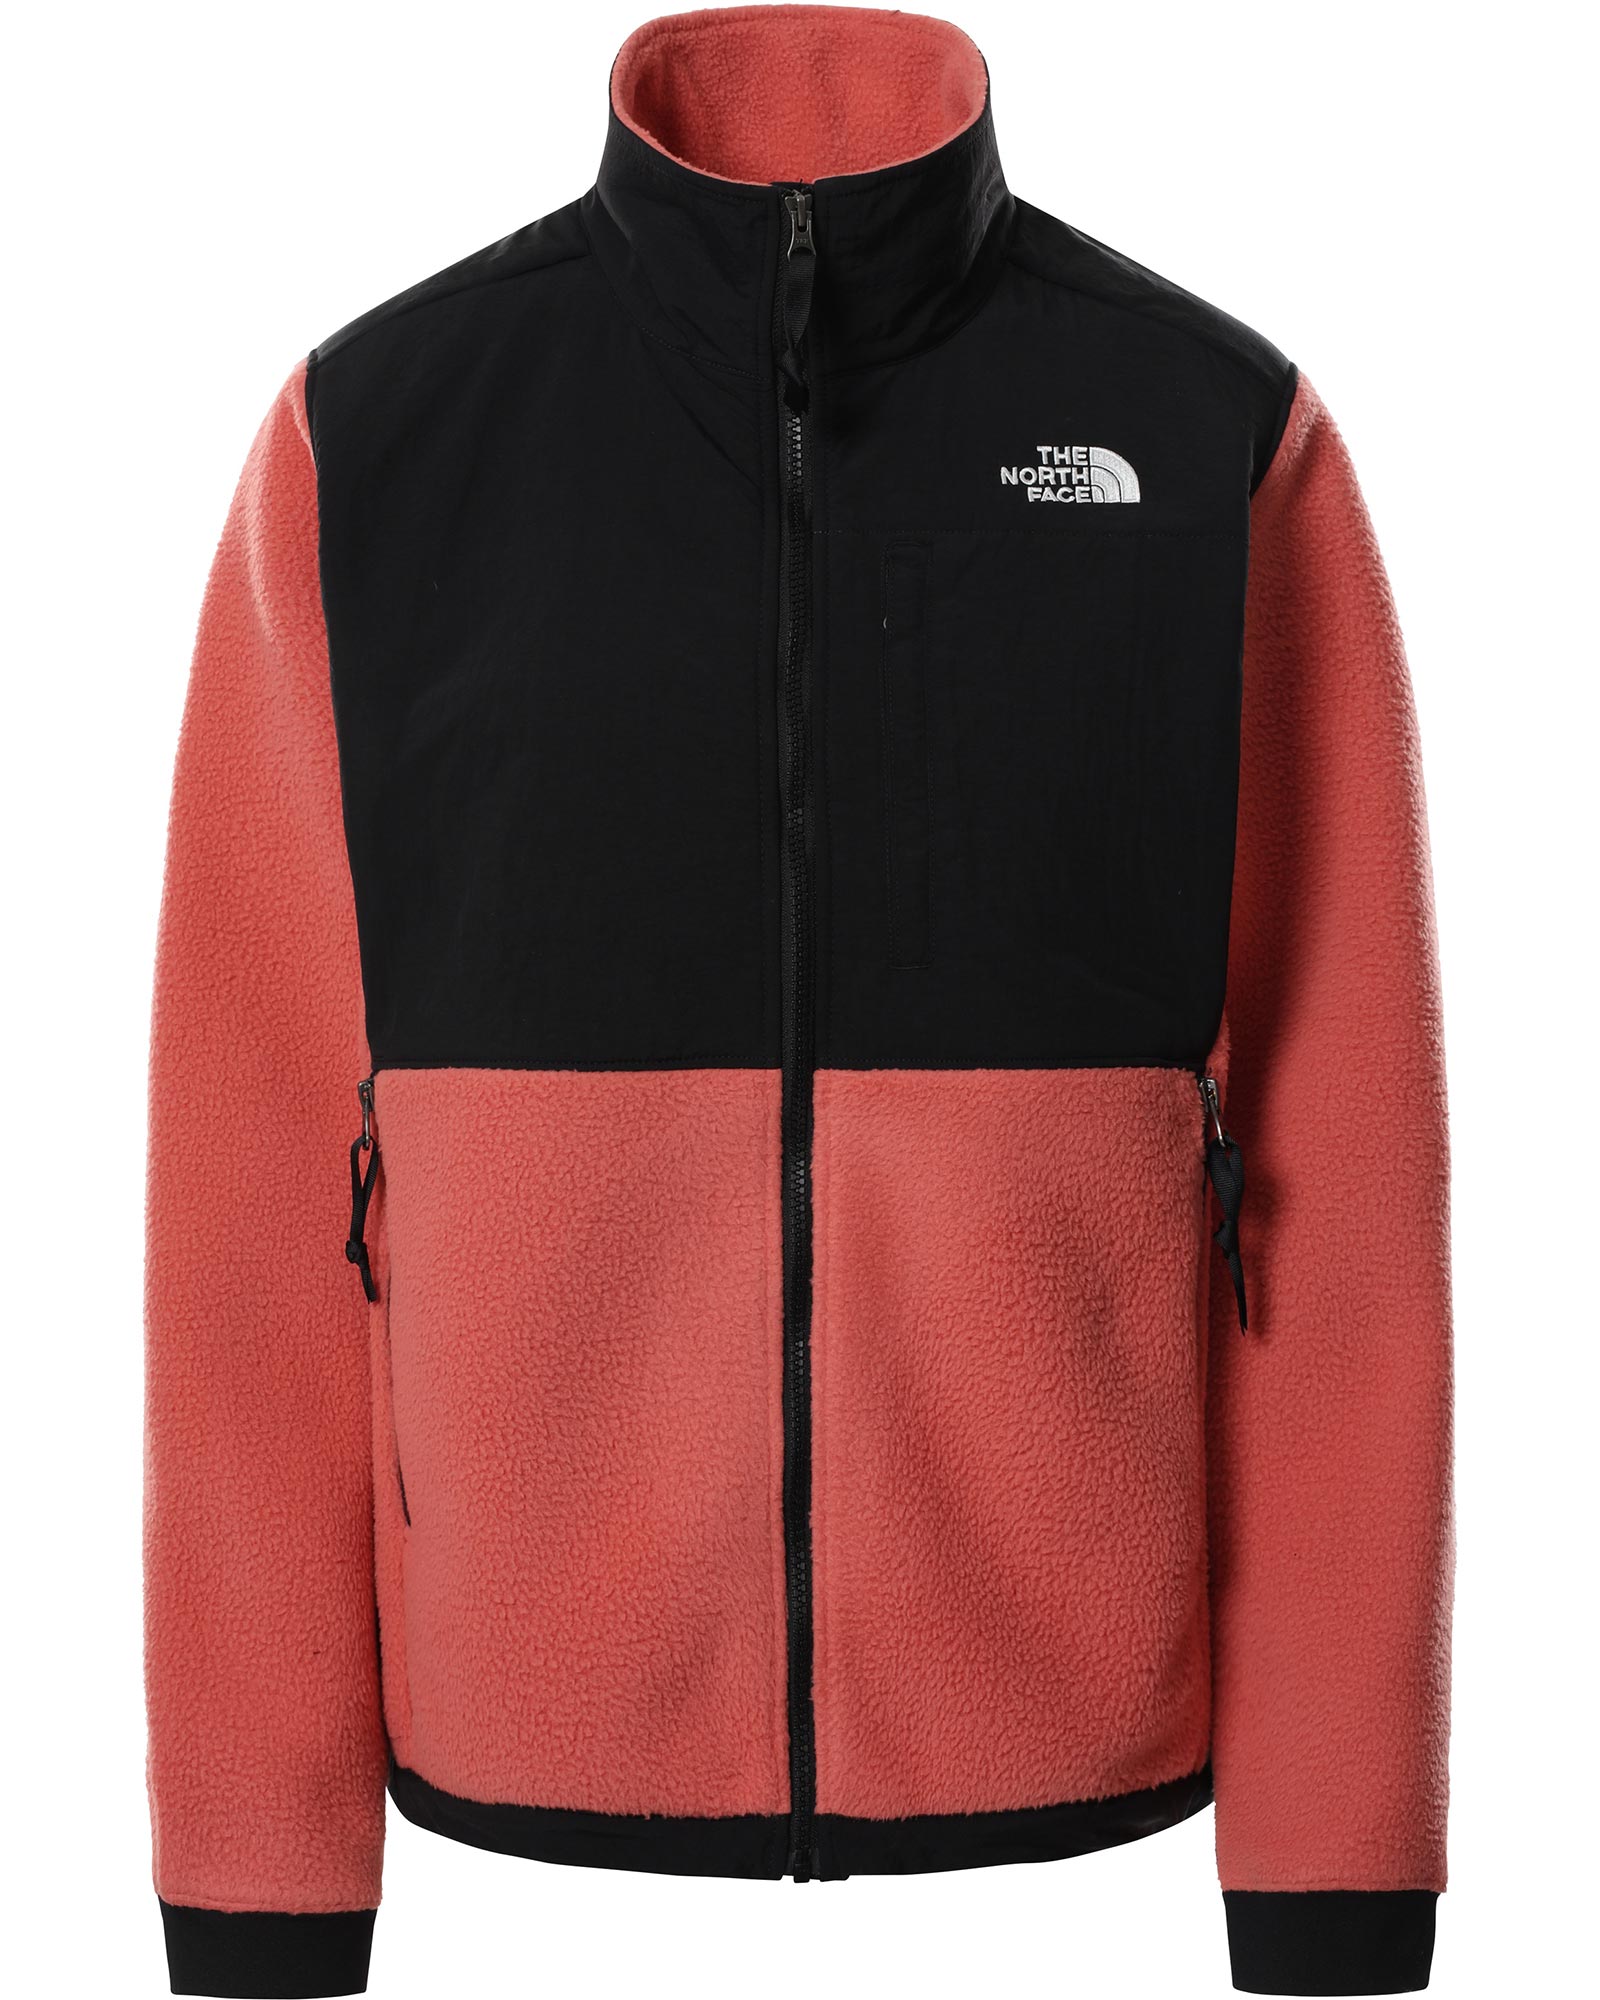 The North Face Denali 2 Women’s Jacket - Faded Rose XS